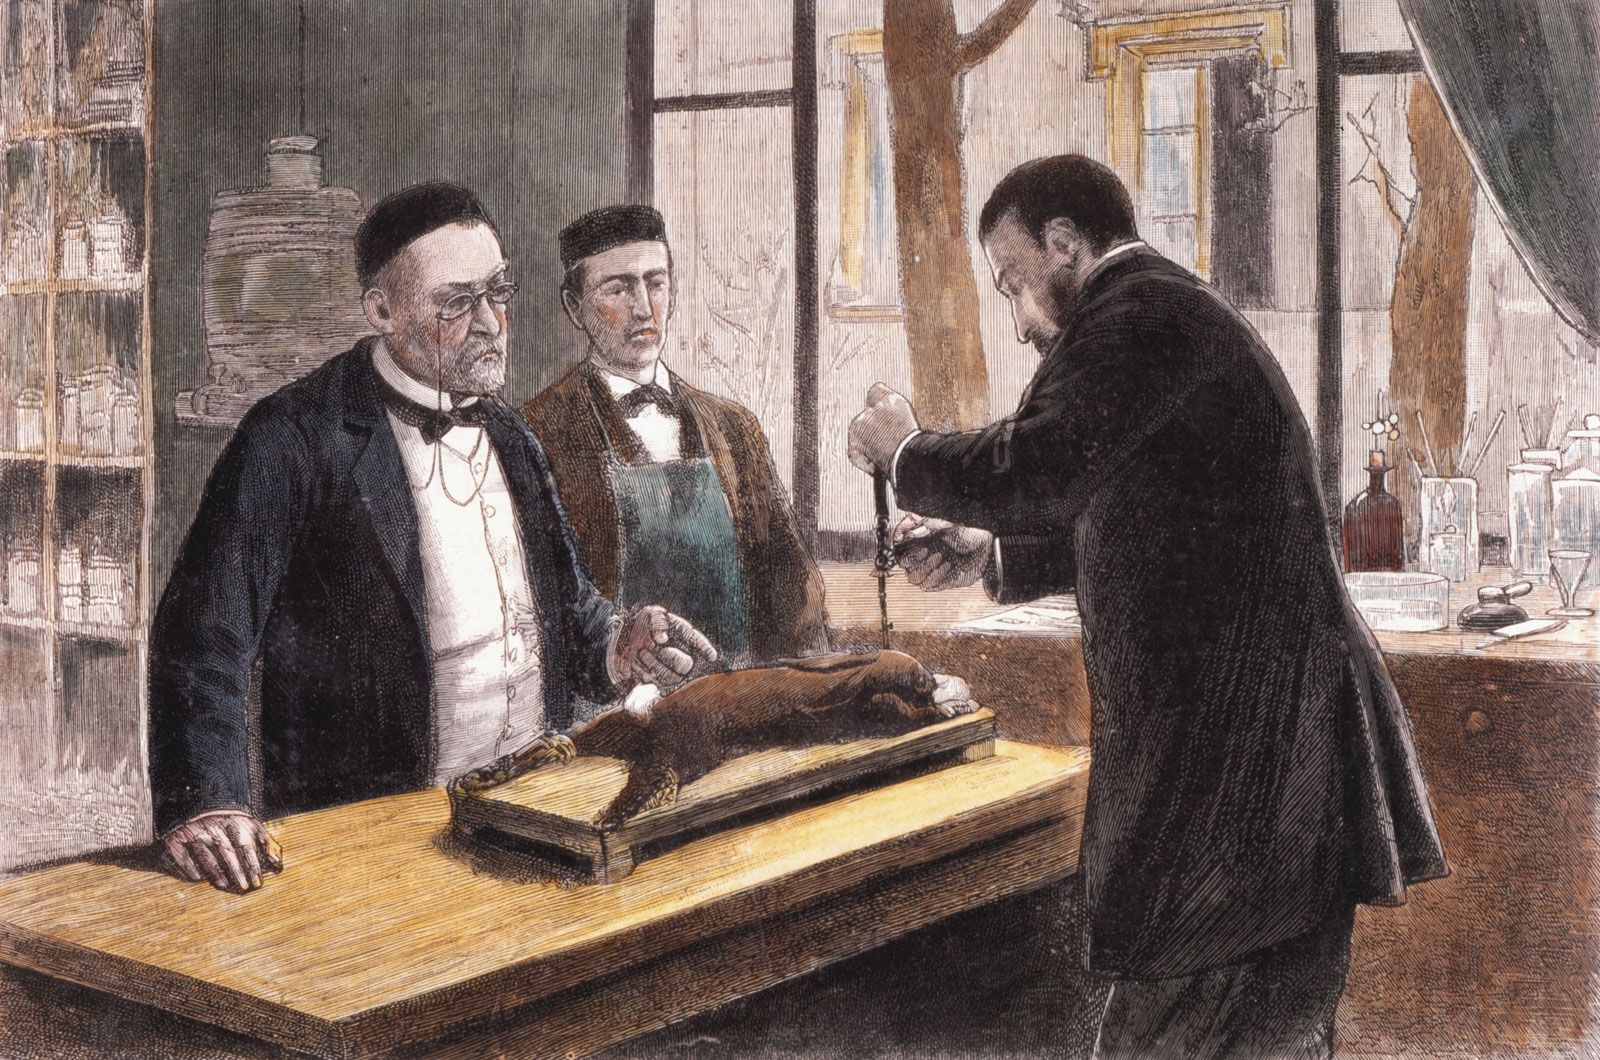 who was louis pasteur and what were louis pasteurs major contributions to microbiology and chemistry